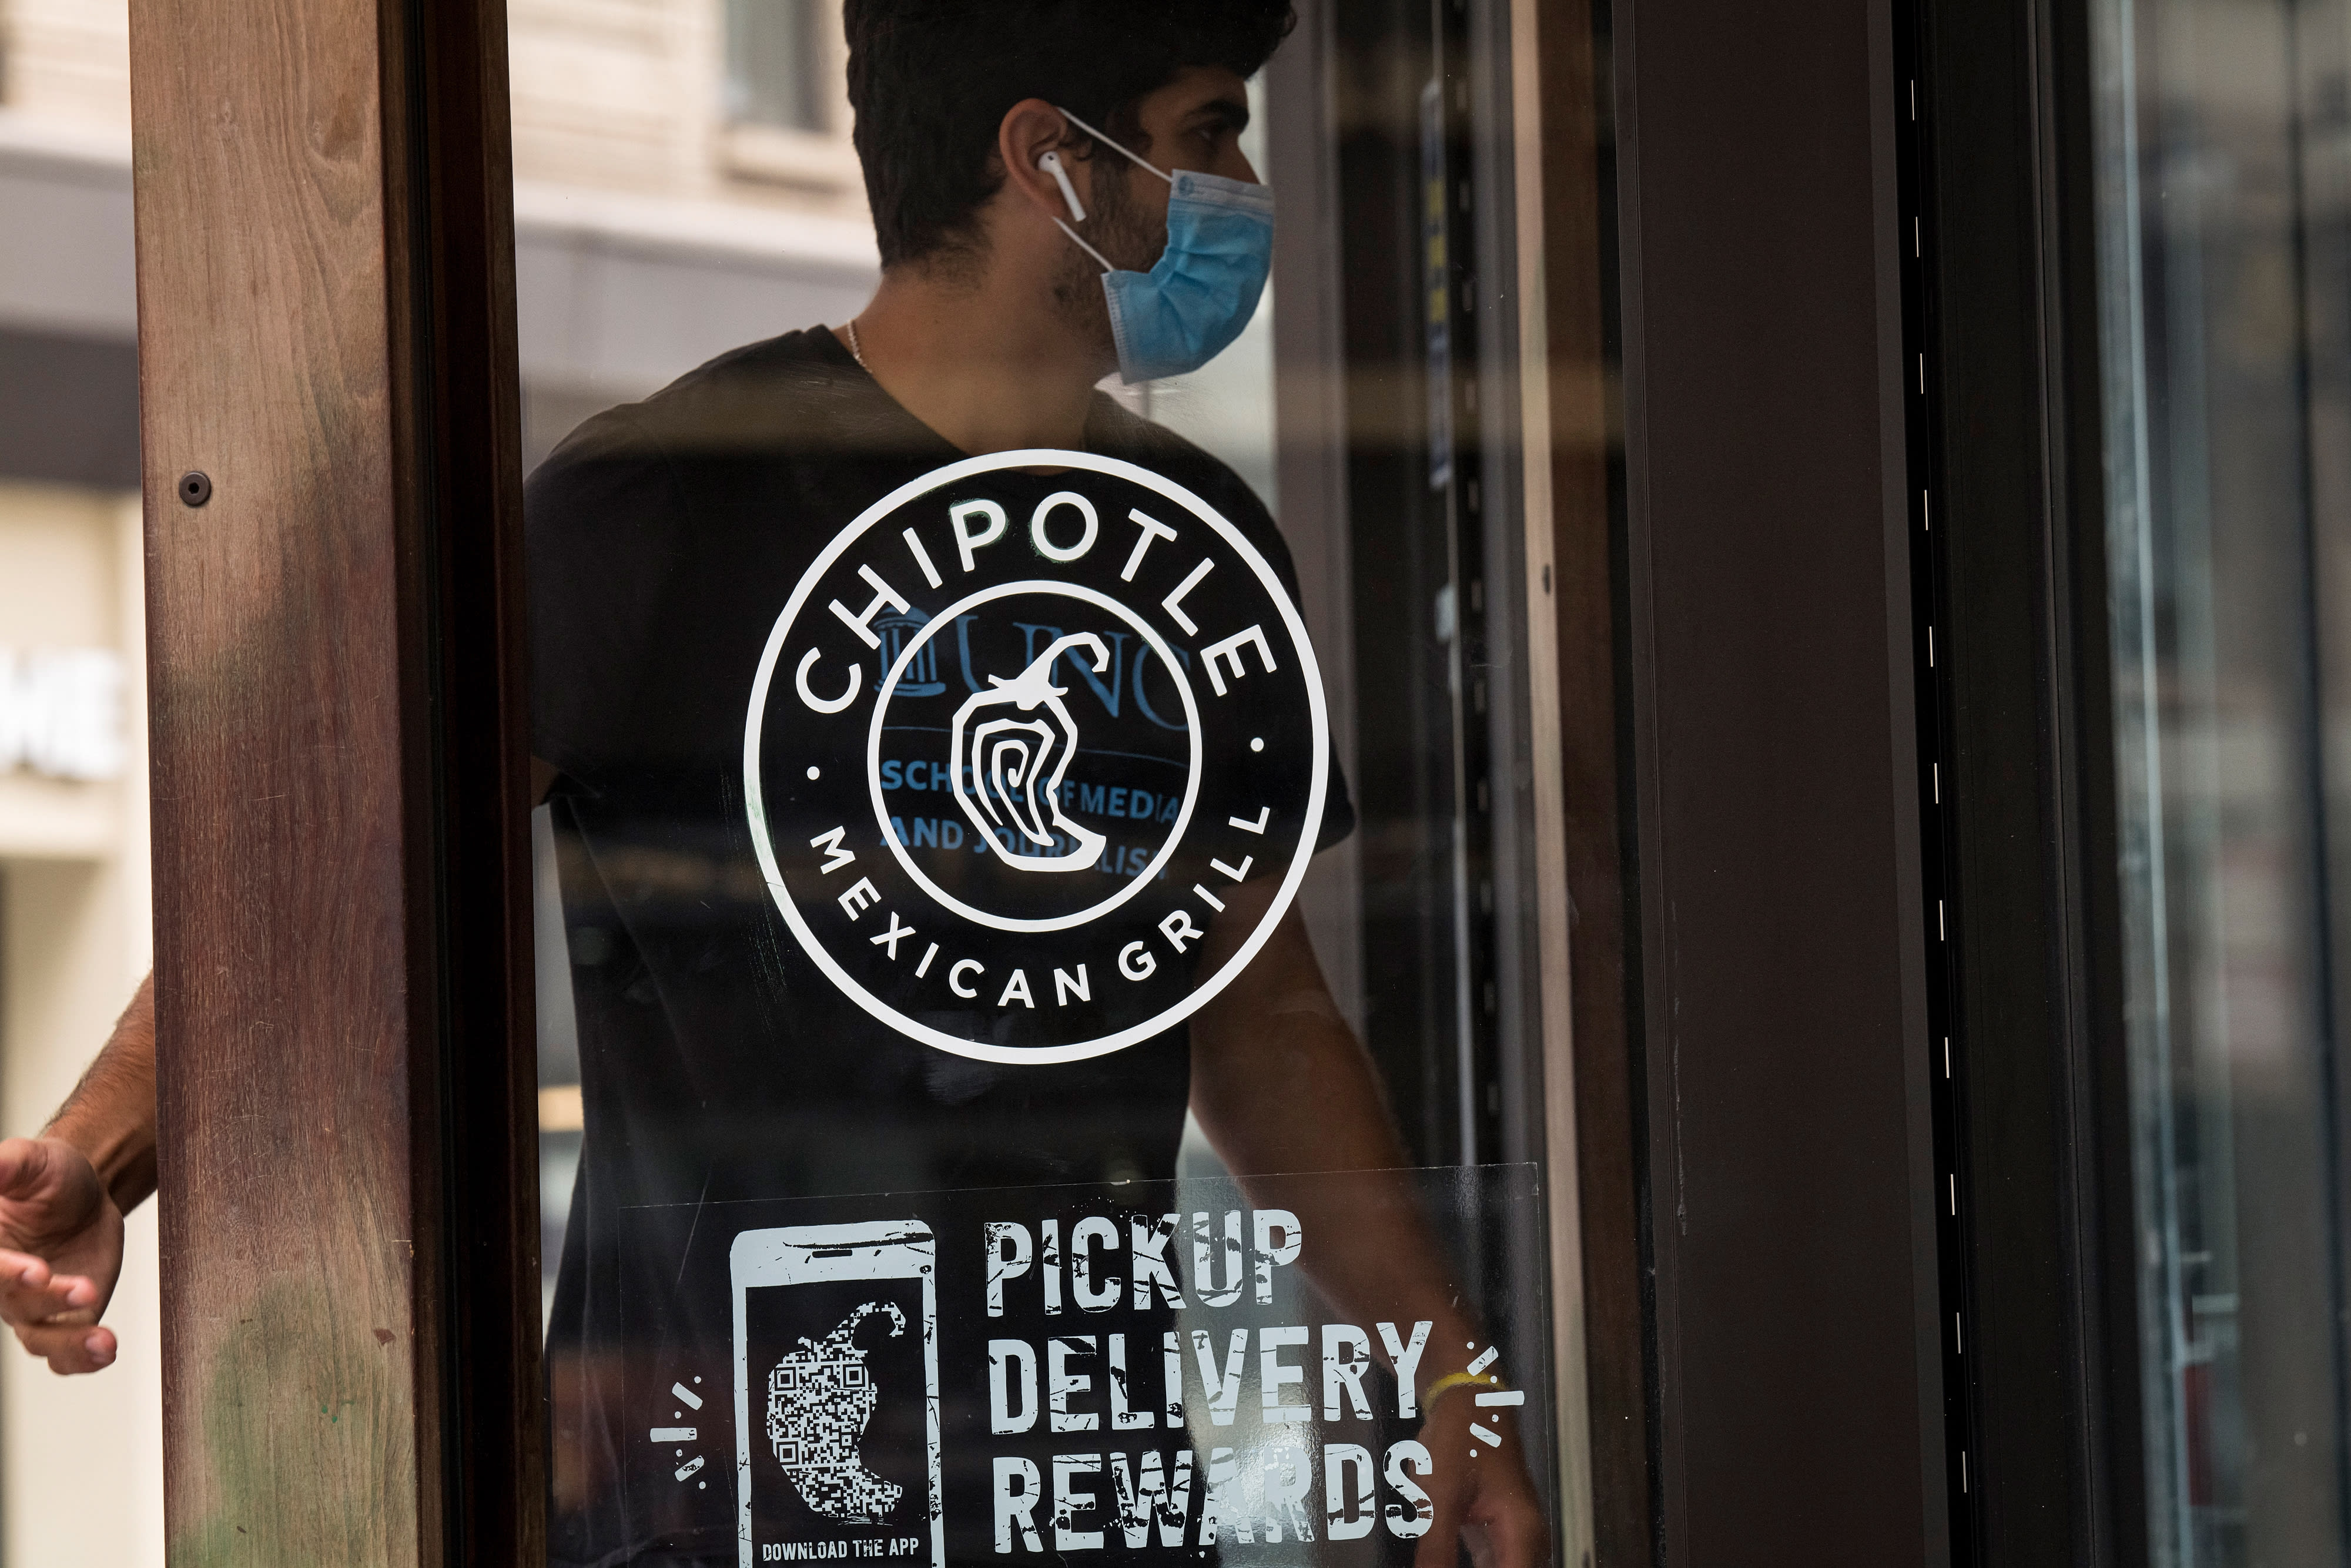 Chipotle opens its first digital-only restaurant as online orders soar